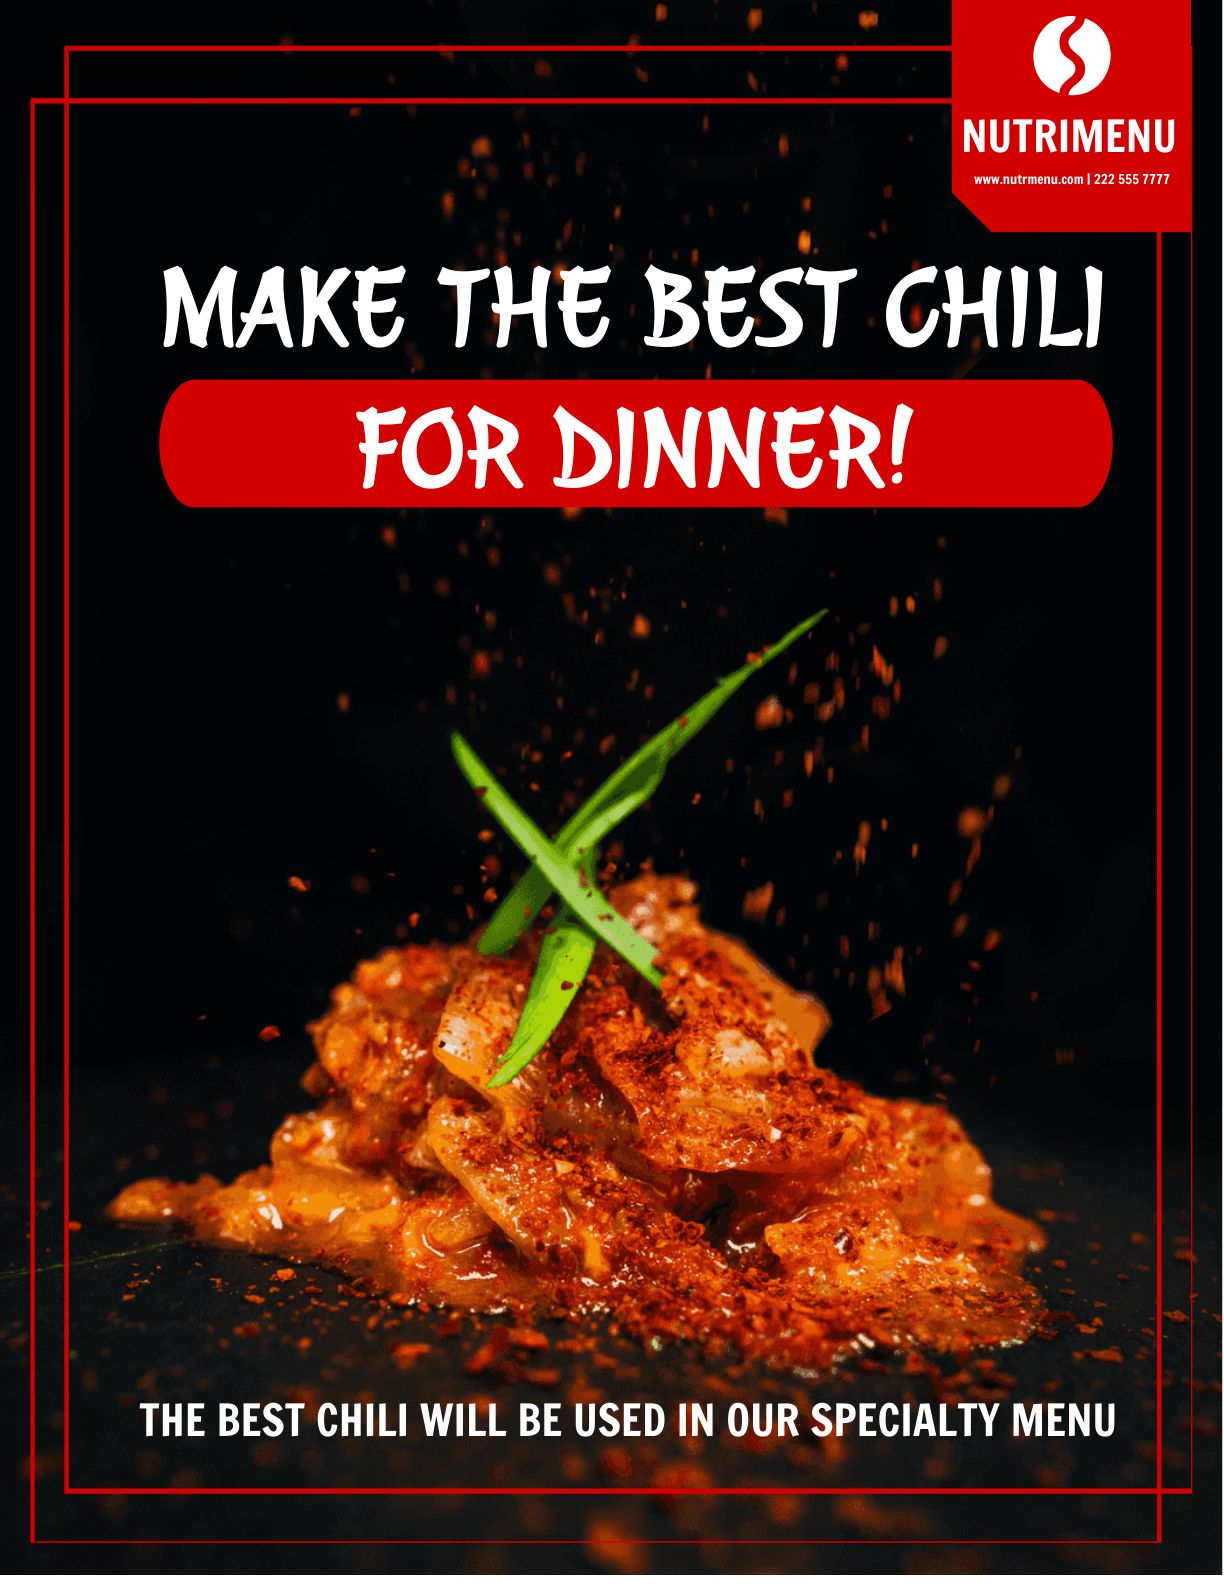 Chili cook off dinner flyer